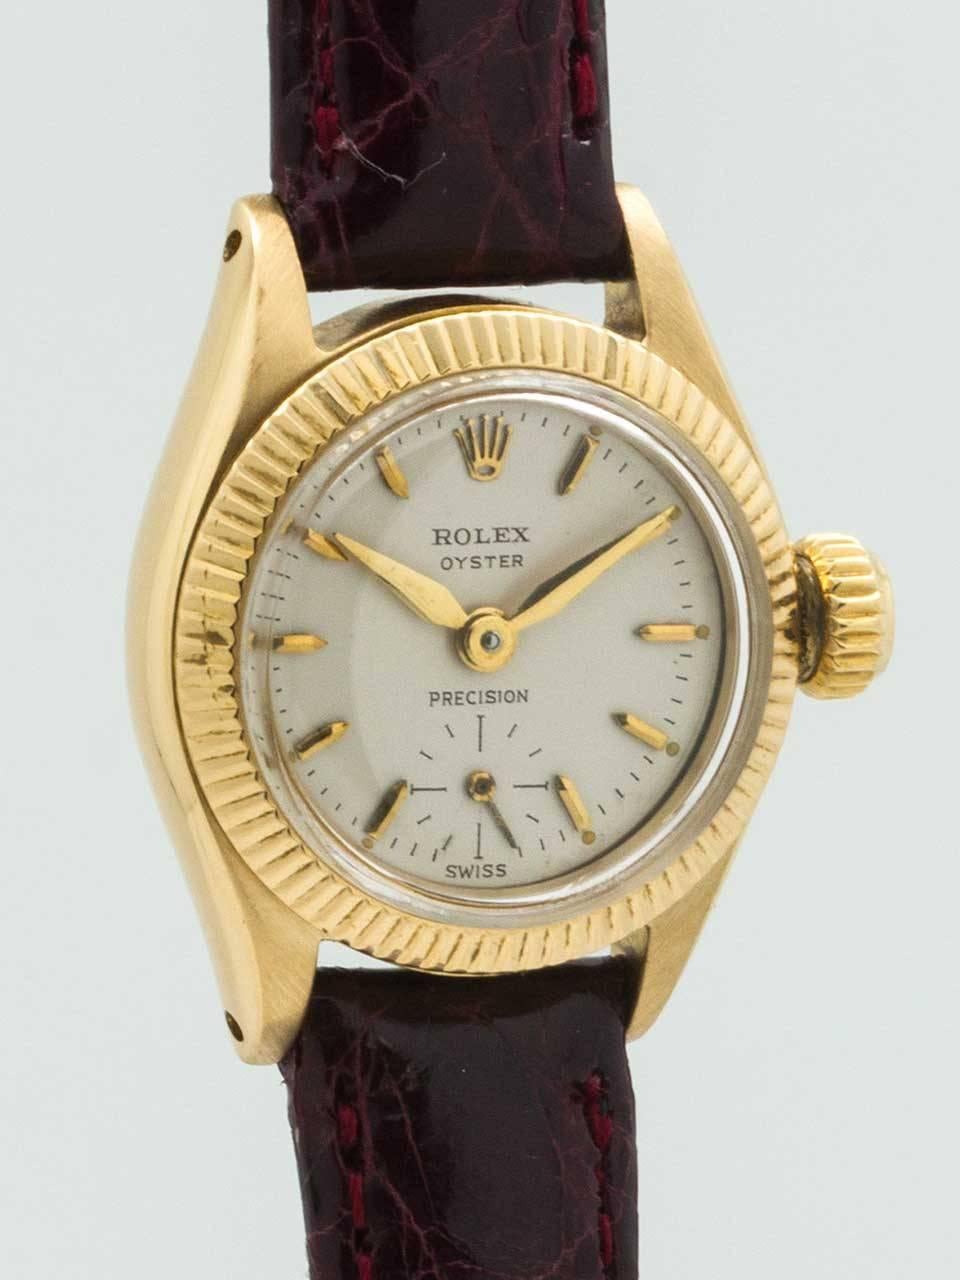 Lady's Rolex 18K Yellow Gold Oyster Precision Wristwatch circa 1958. 27mm diameter Oyster case with fluted bezel, screw down case back and original period crown. With original matte silvered dial with applied gold indexes and tapered gilt hands.